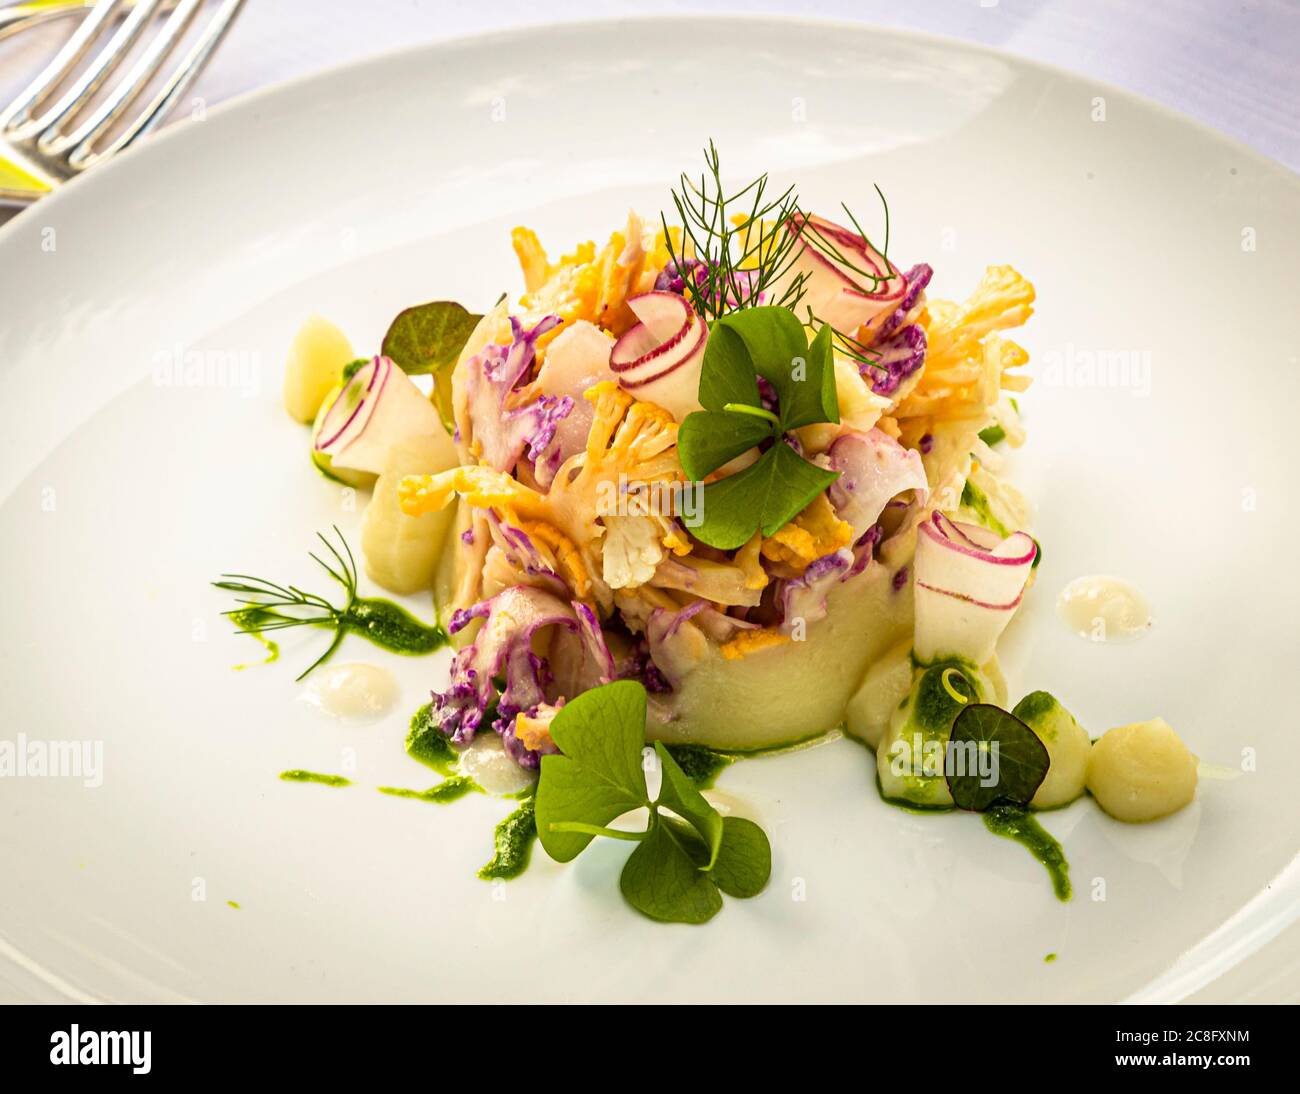 Gourmet Dish by Hotel Krone Chef de cuisine Peter Prüfer in Weil am Rhein, Germany. The colorful cauliflower is accompanied by navette, a type of radish, and versus vinaigrette and frisée Stock Photo